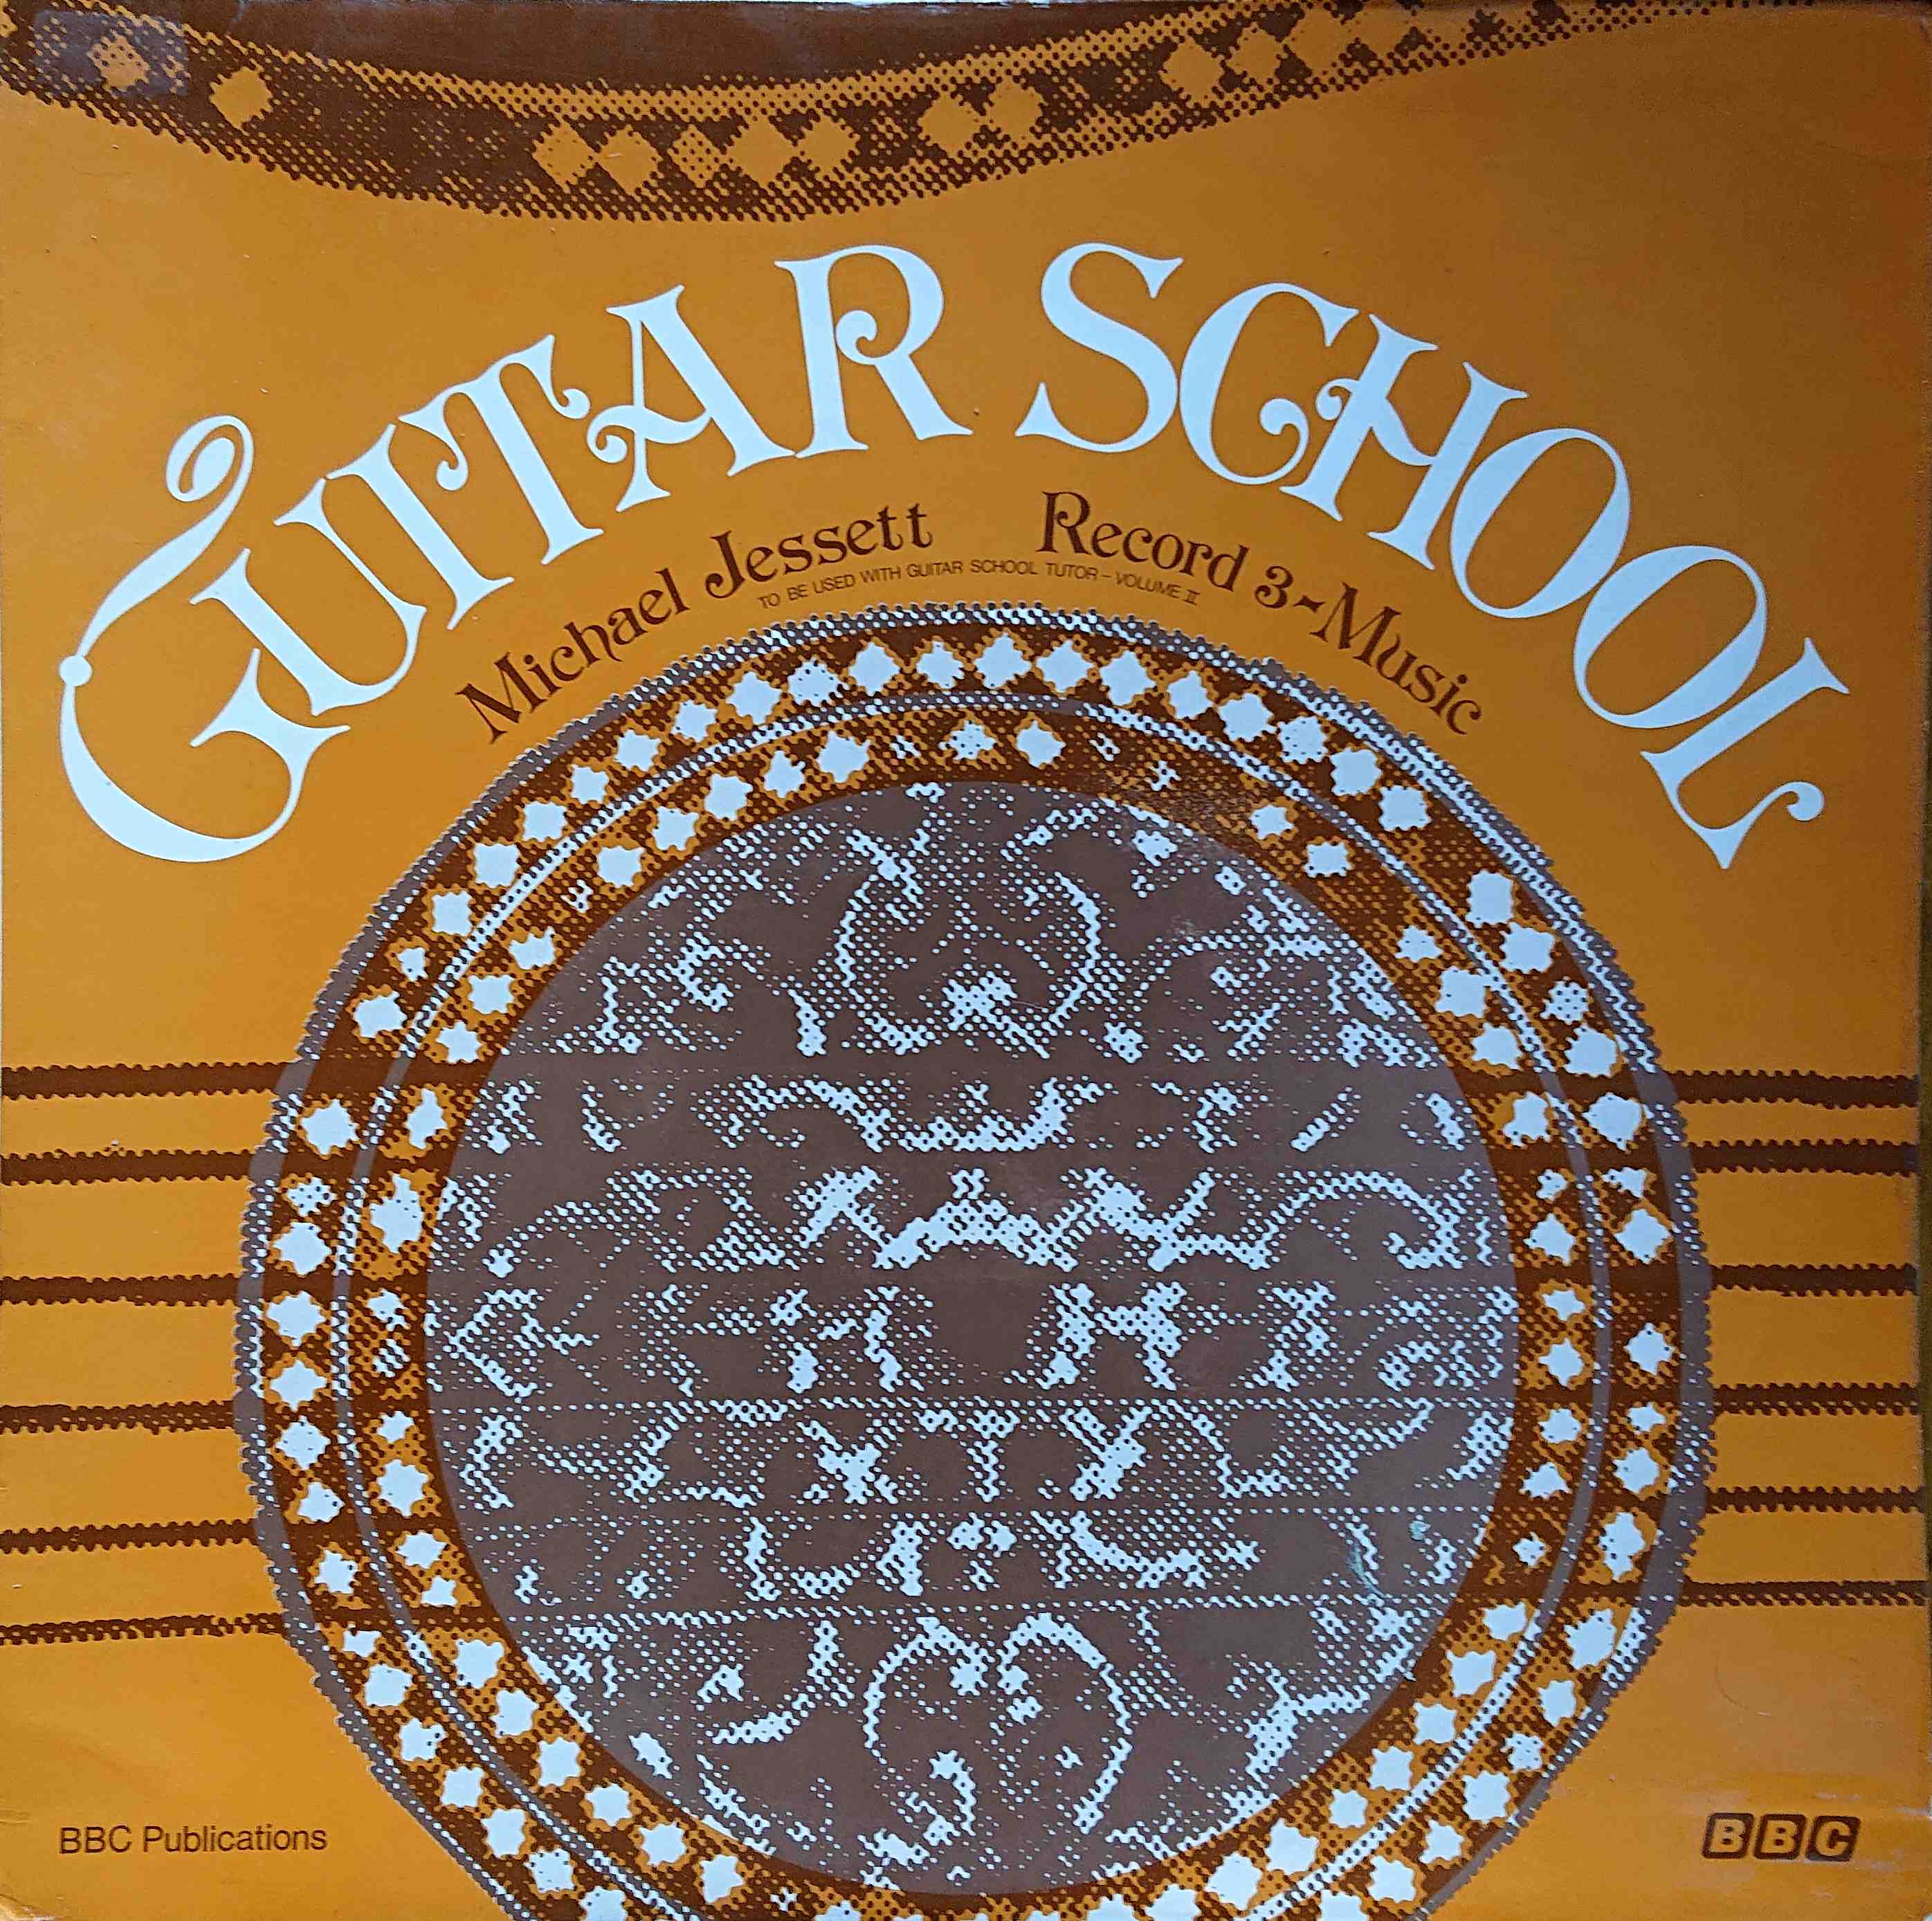 Picture of OP 205/206 Guitar school - Record 3 - Music by artist Michael Jessett from the BBC records and Tapes library